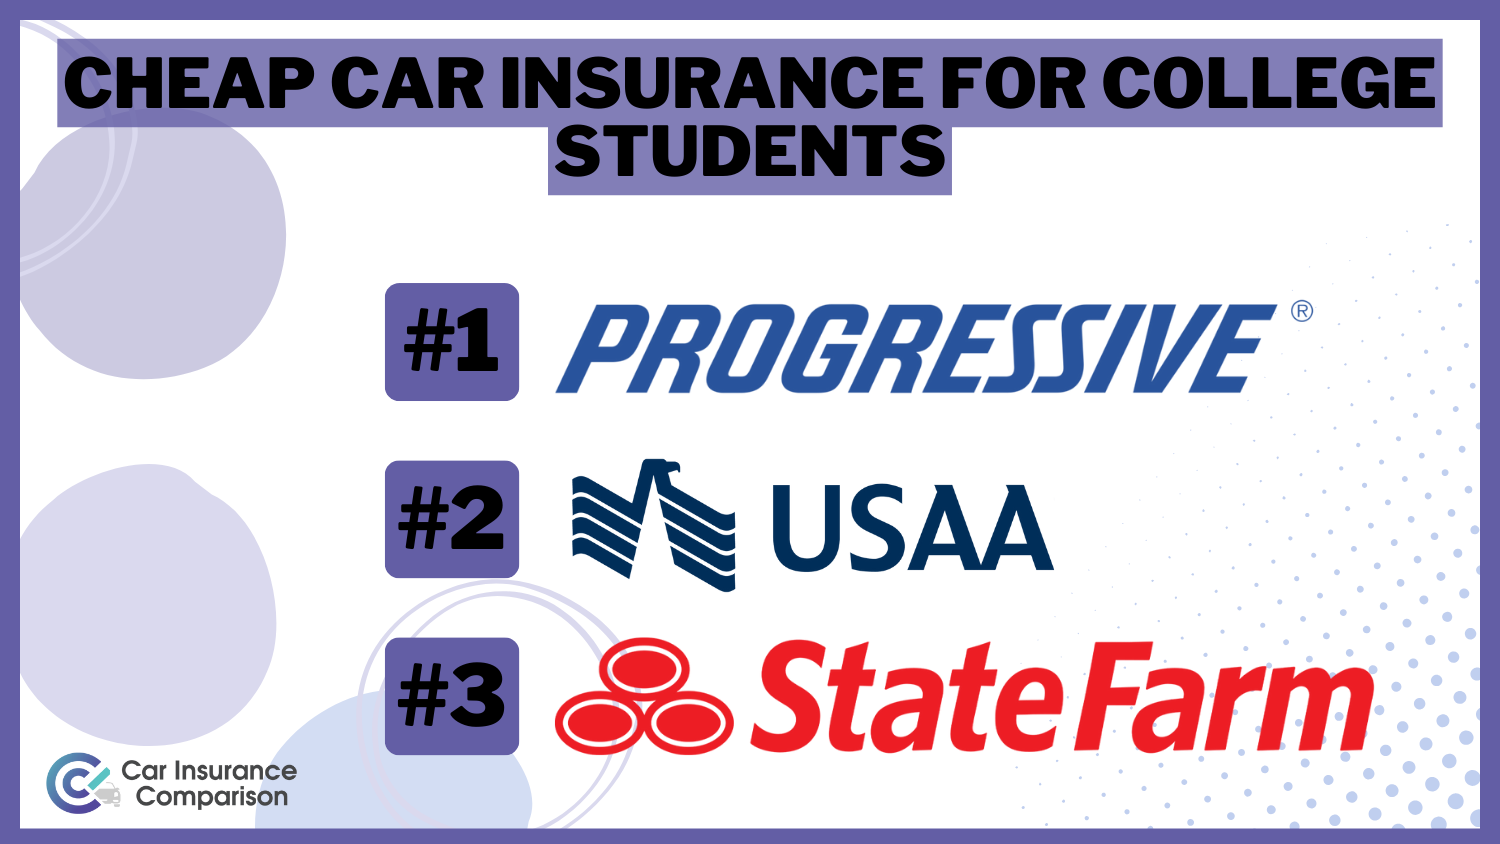 Cheap Car Insurance for College Students: Progressive, USAA, and State Farm.